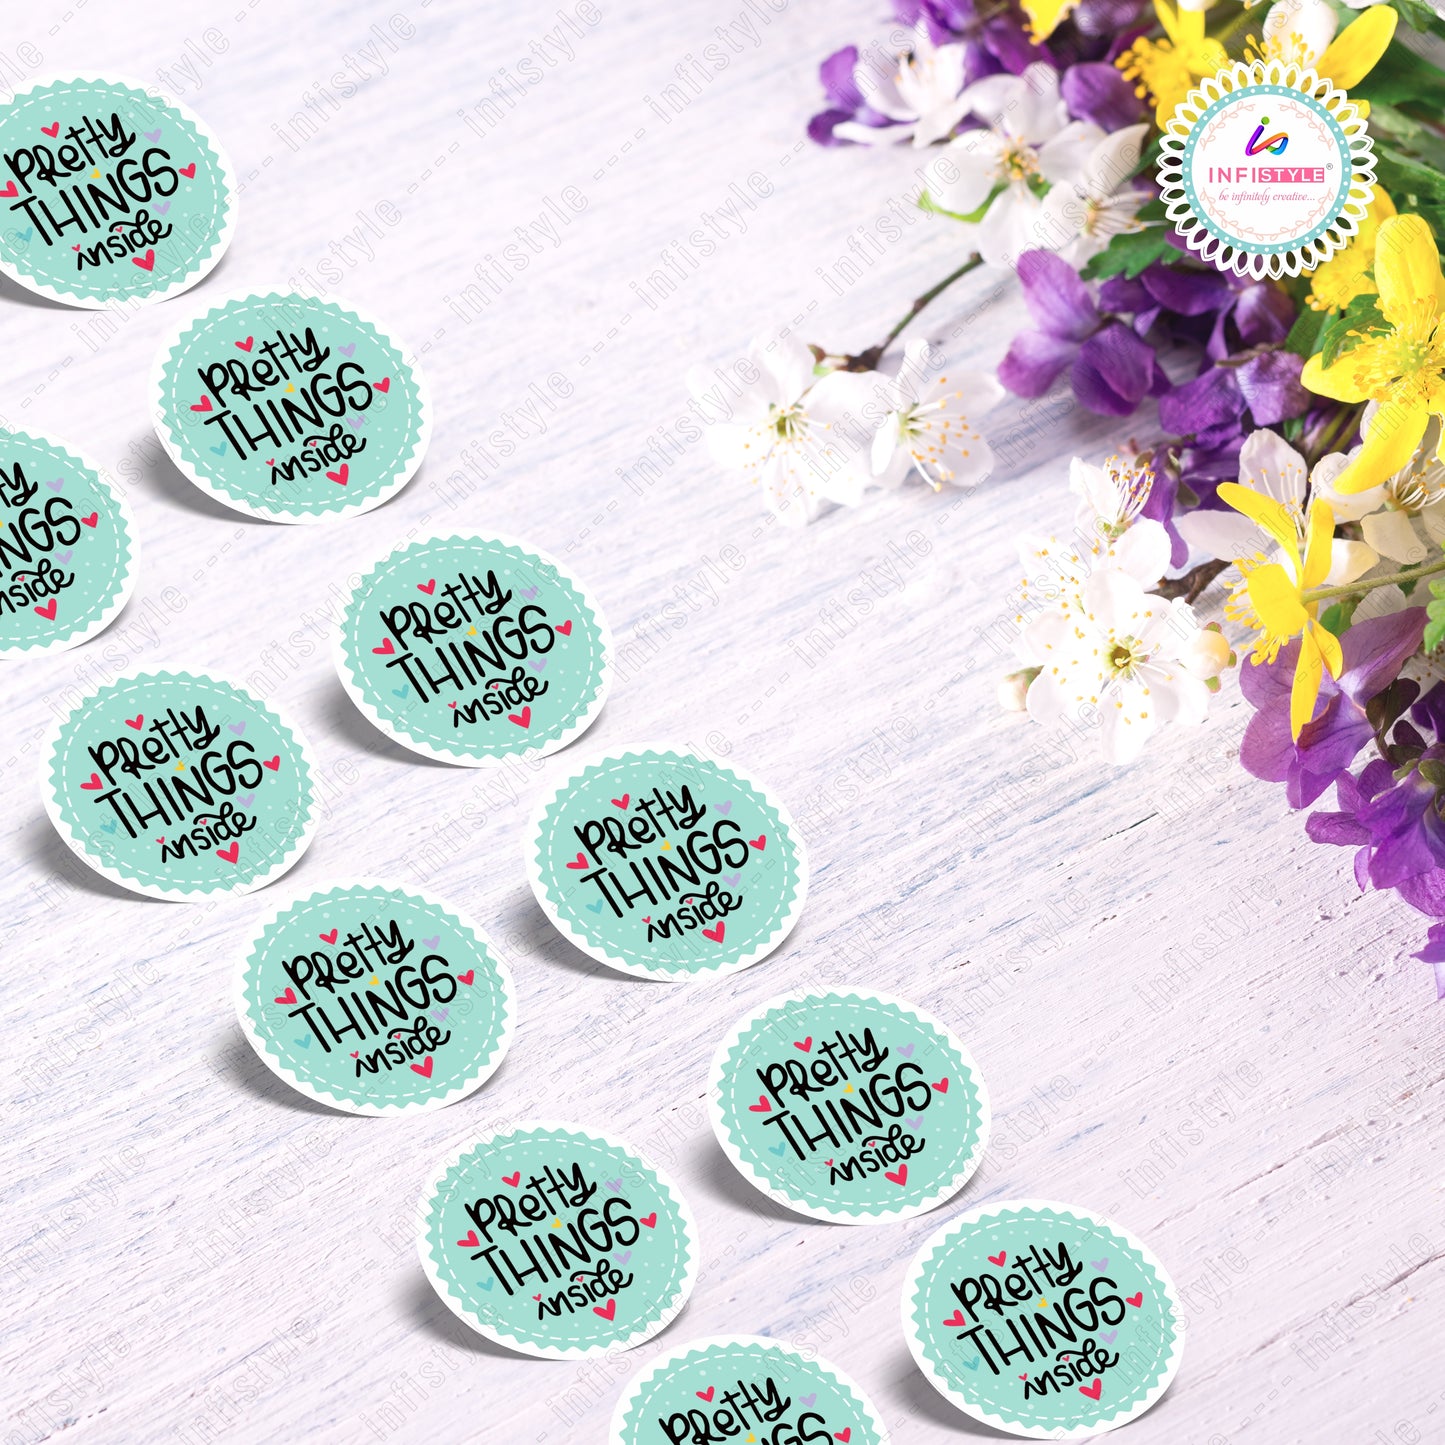 Pretty Things Inside Stickers Round Sticker Label